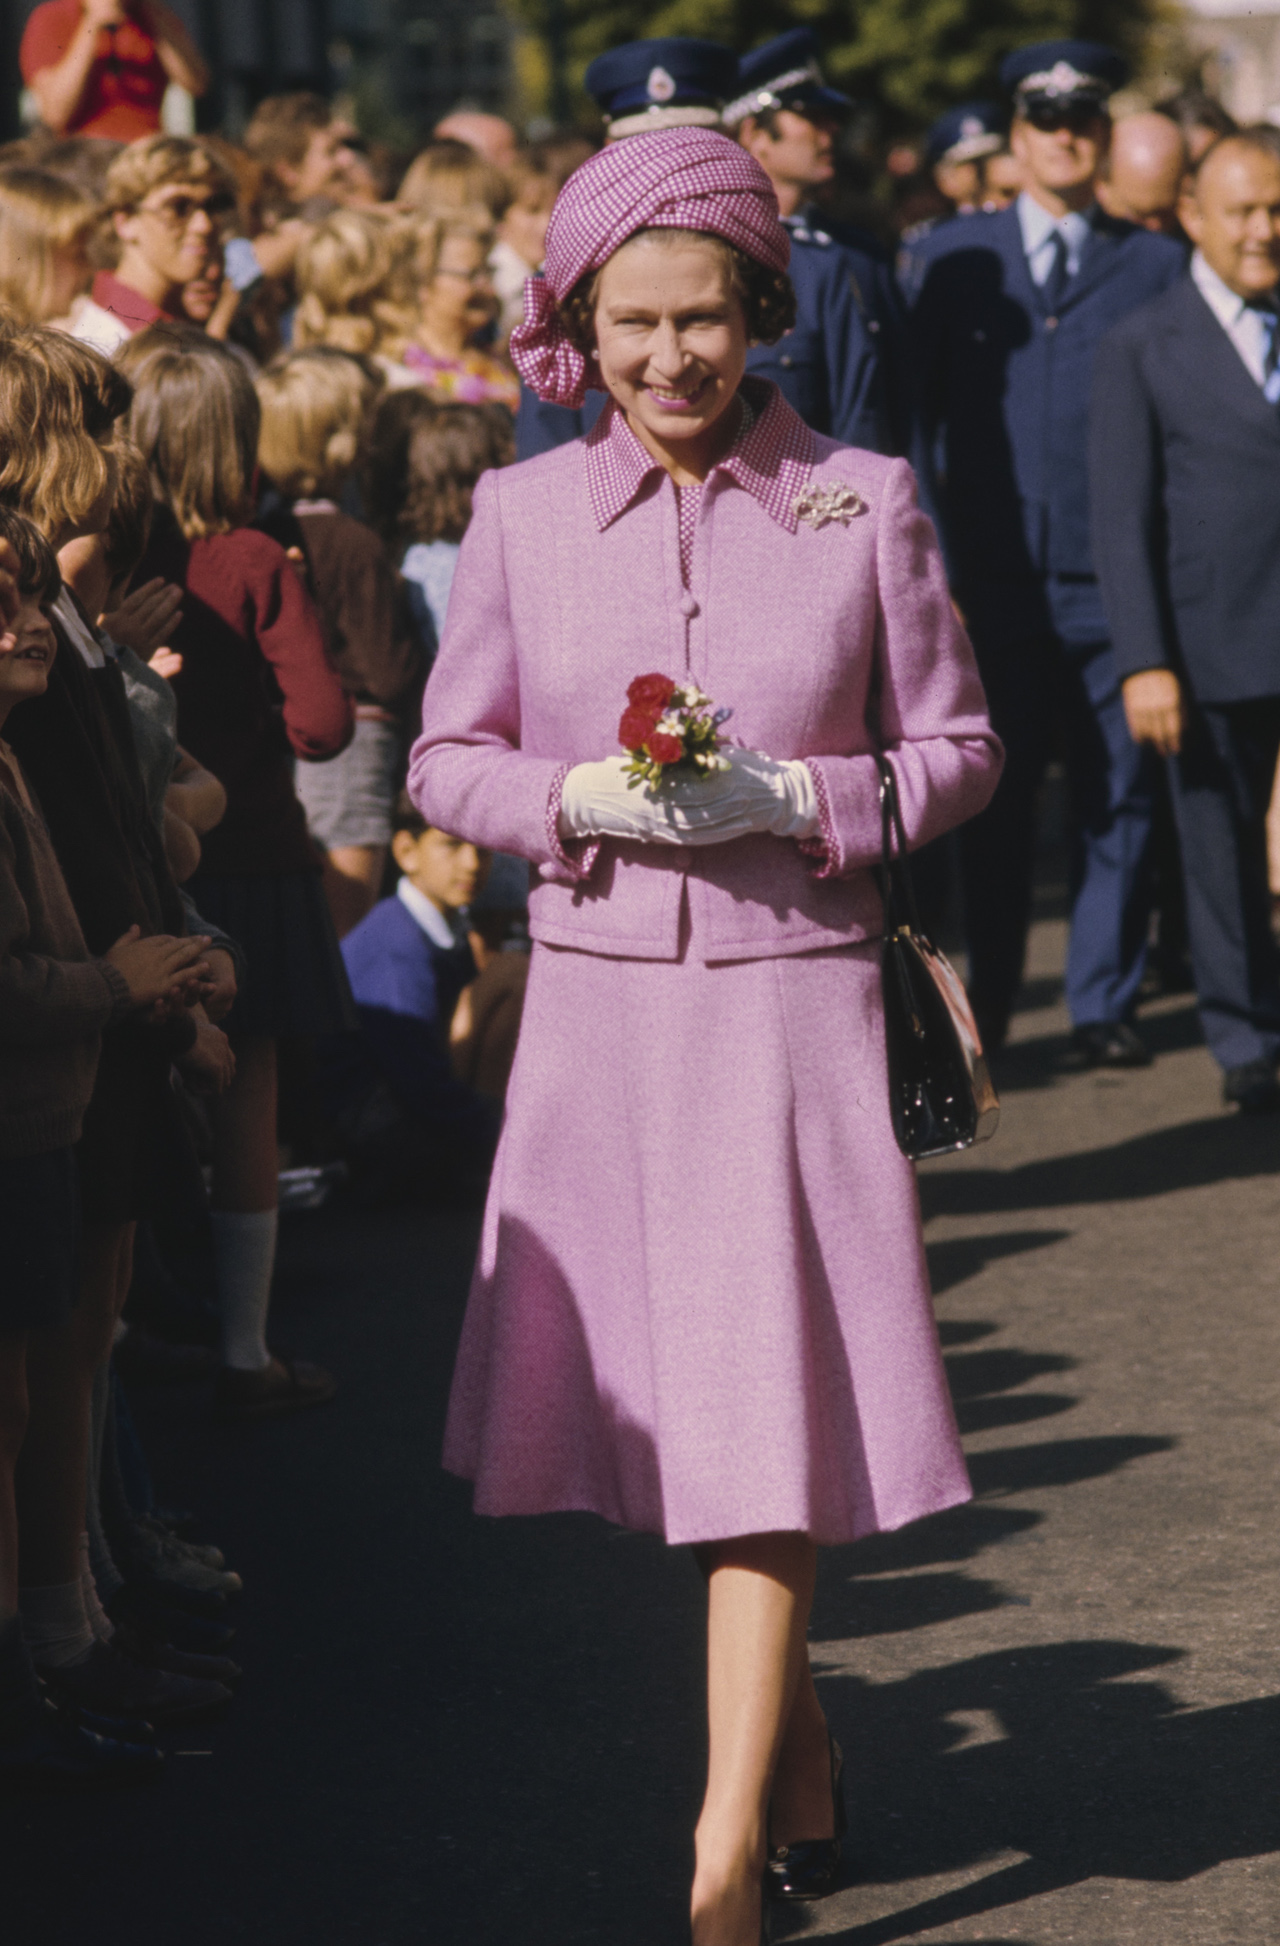 Queen Elizabeth II's Most Memorable Style Moments Through the Years